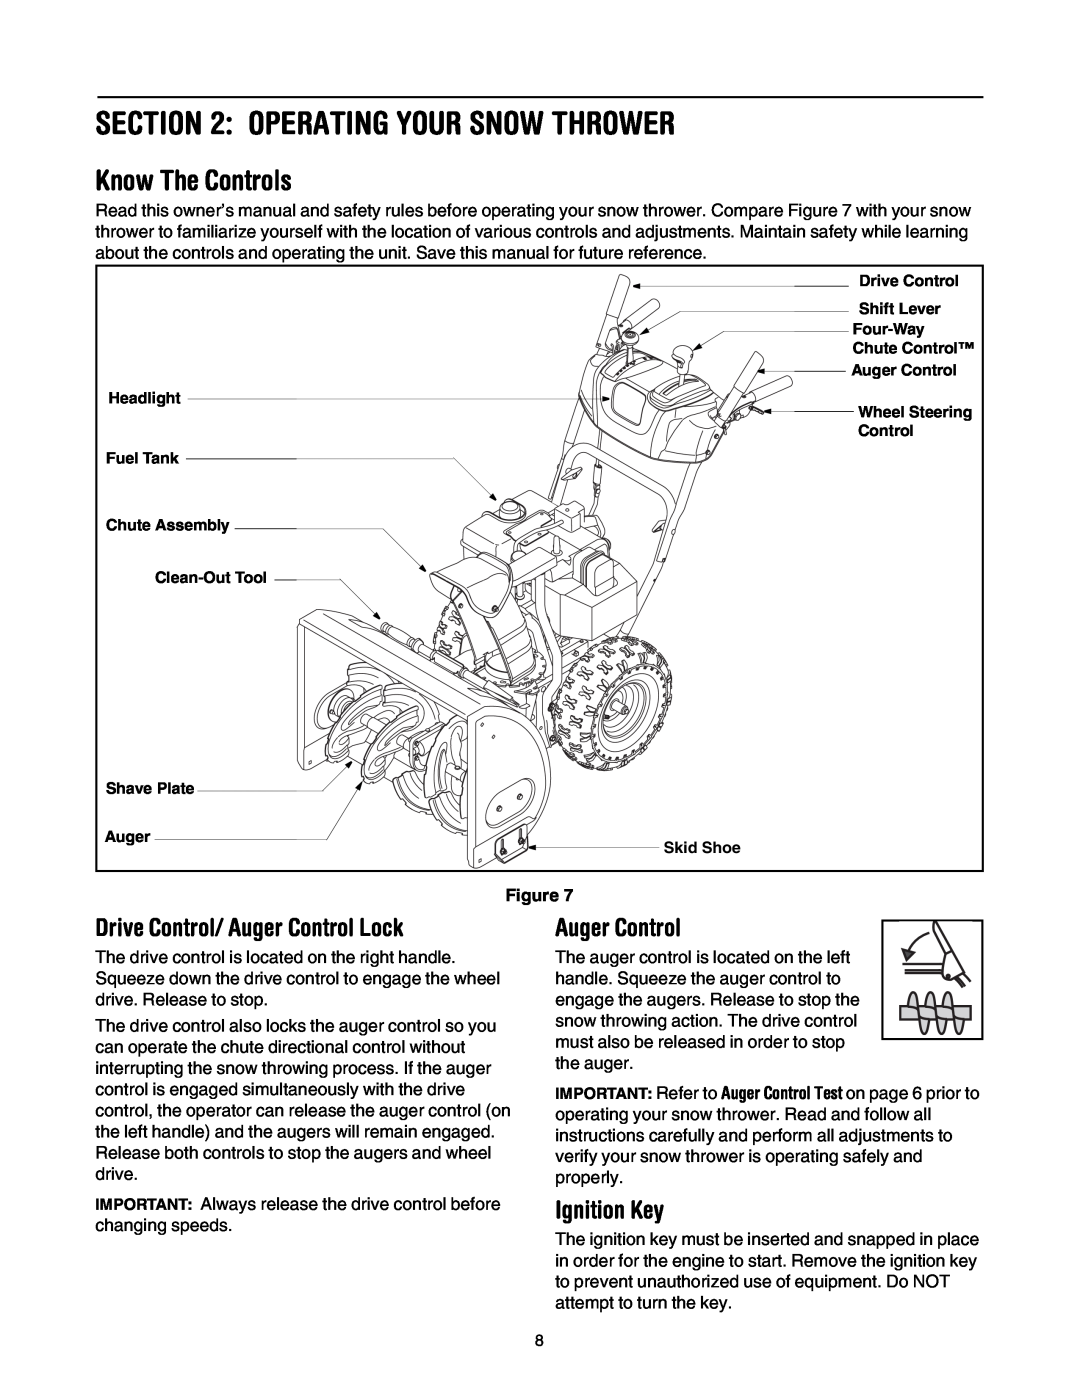 Yard-Man 5KL manual Operating Your Snow Thrower, Know The Controls, Drive Control/ Auger Control Lock, Ignition Key 